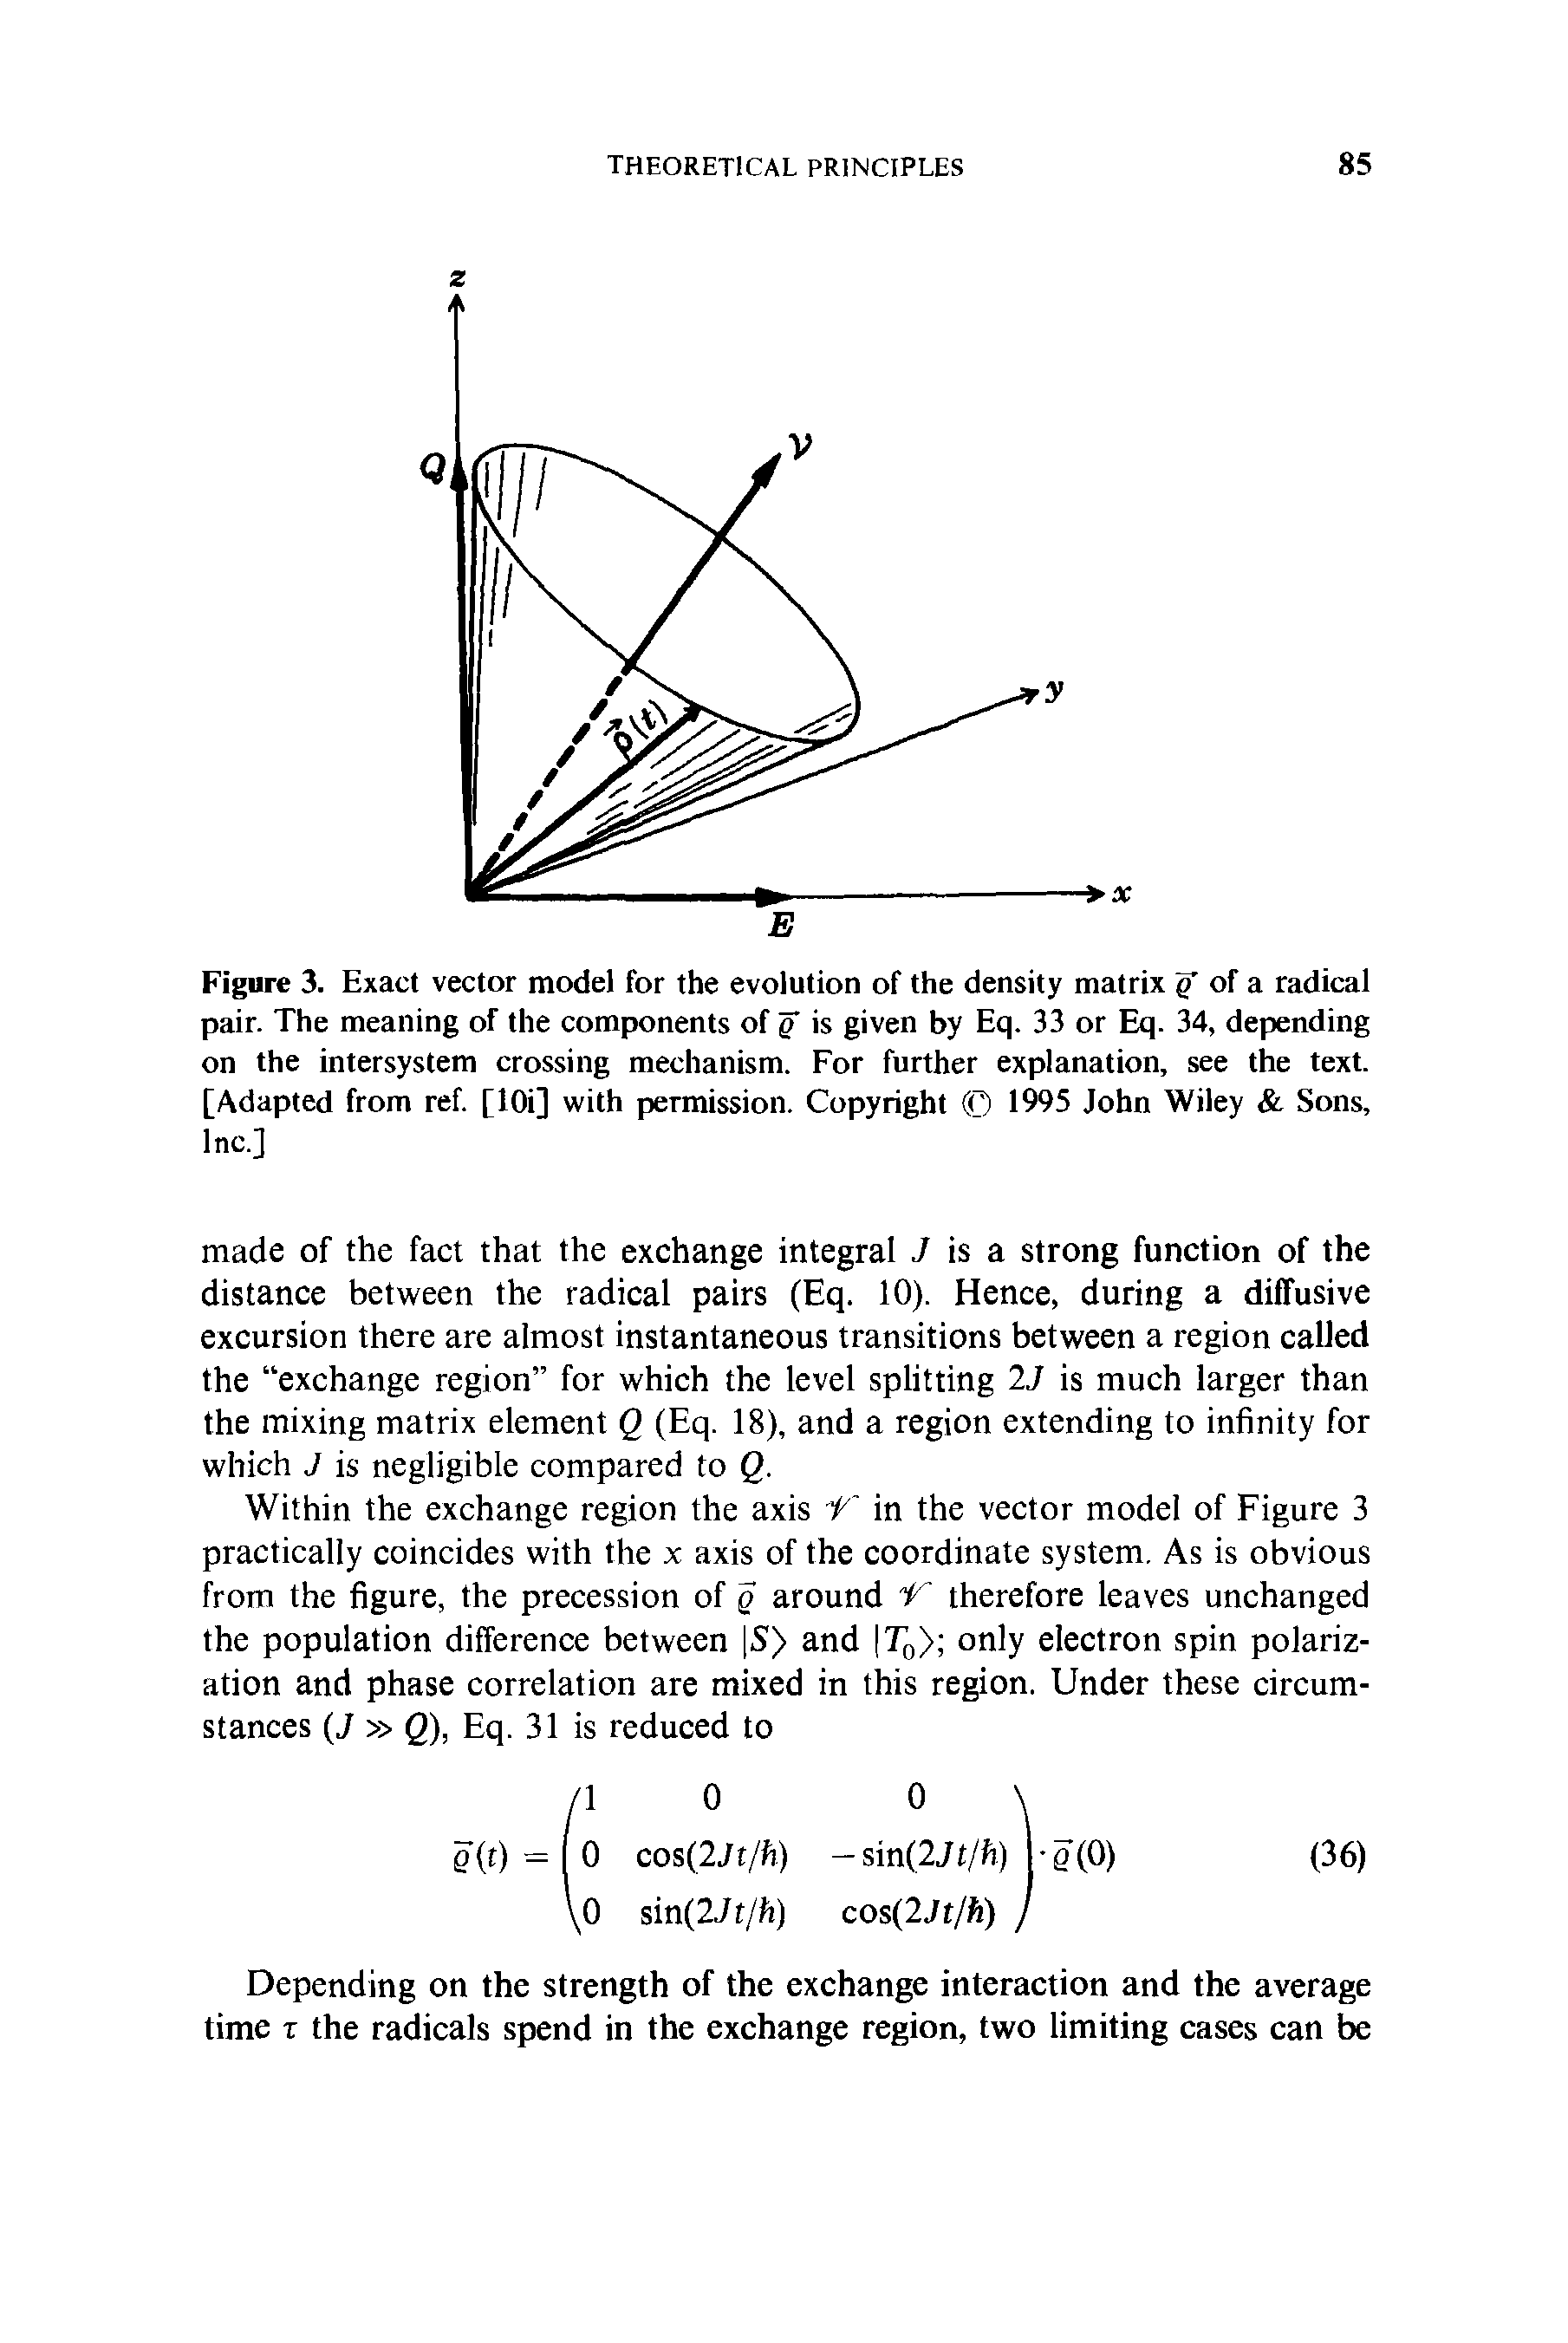 Figure 3. Exact vector model for the evolution of the density matrix of a radical pair. The meaning of the components of q is given by Eq. 33 or Eq. 34, depending on the intersystem crossing mechanism. For further explanation, see the text. [Adapted from ref. [lOi] with permission. Copyright 1995 John Wiley Sons, Inc.]...